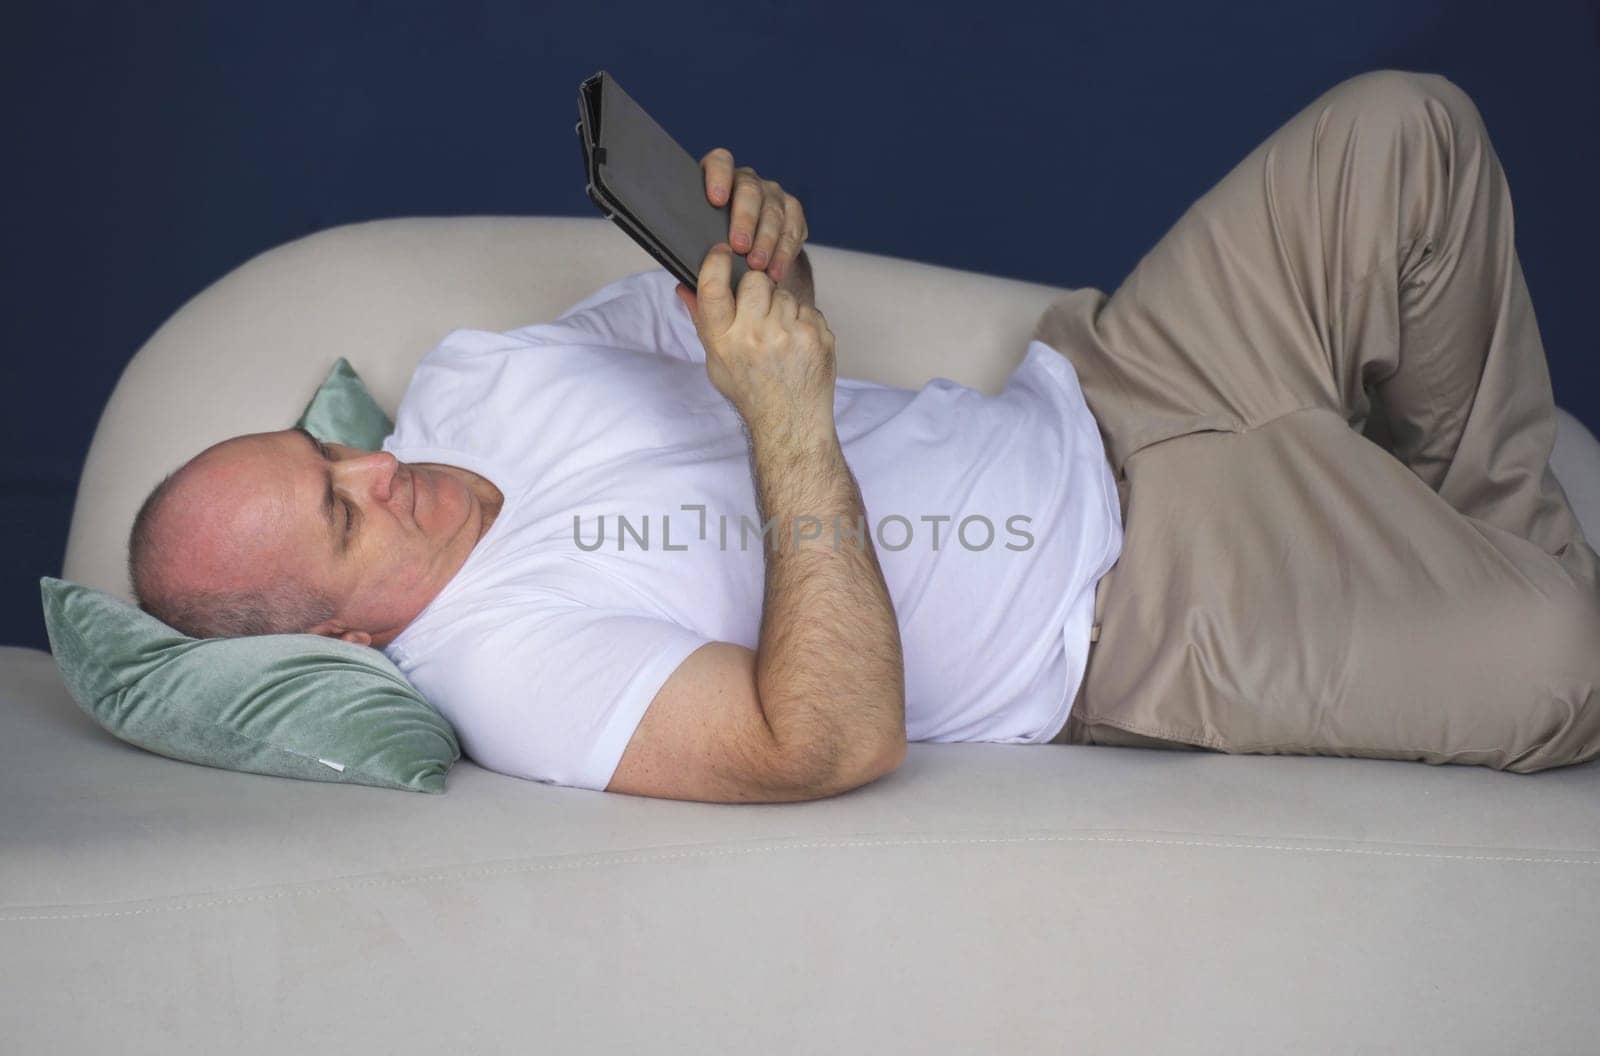 A middle-aged man lies on the couch and makes notes in a notebook. by Sd28DimoN_1976